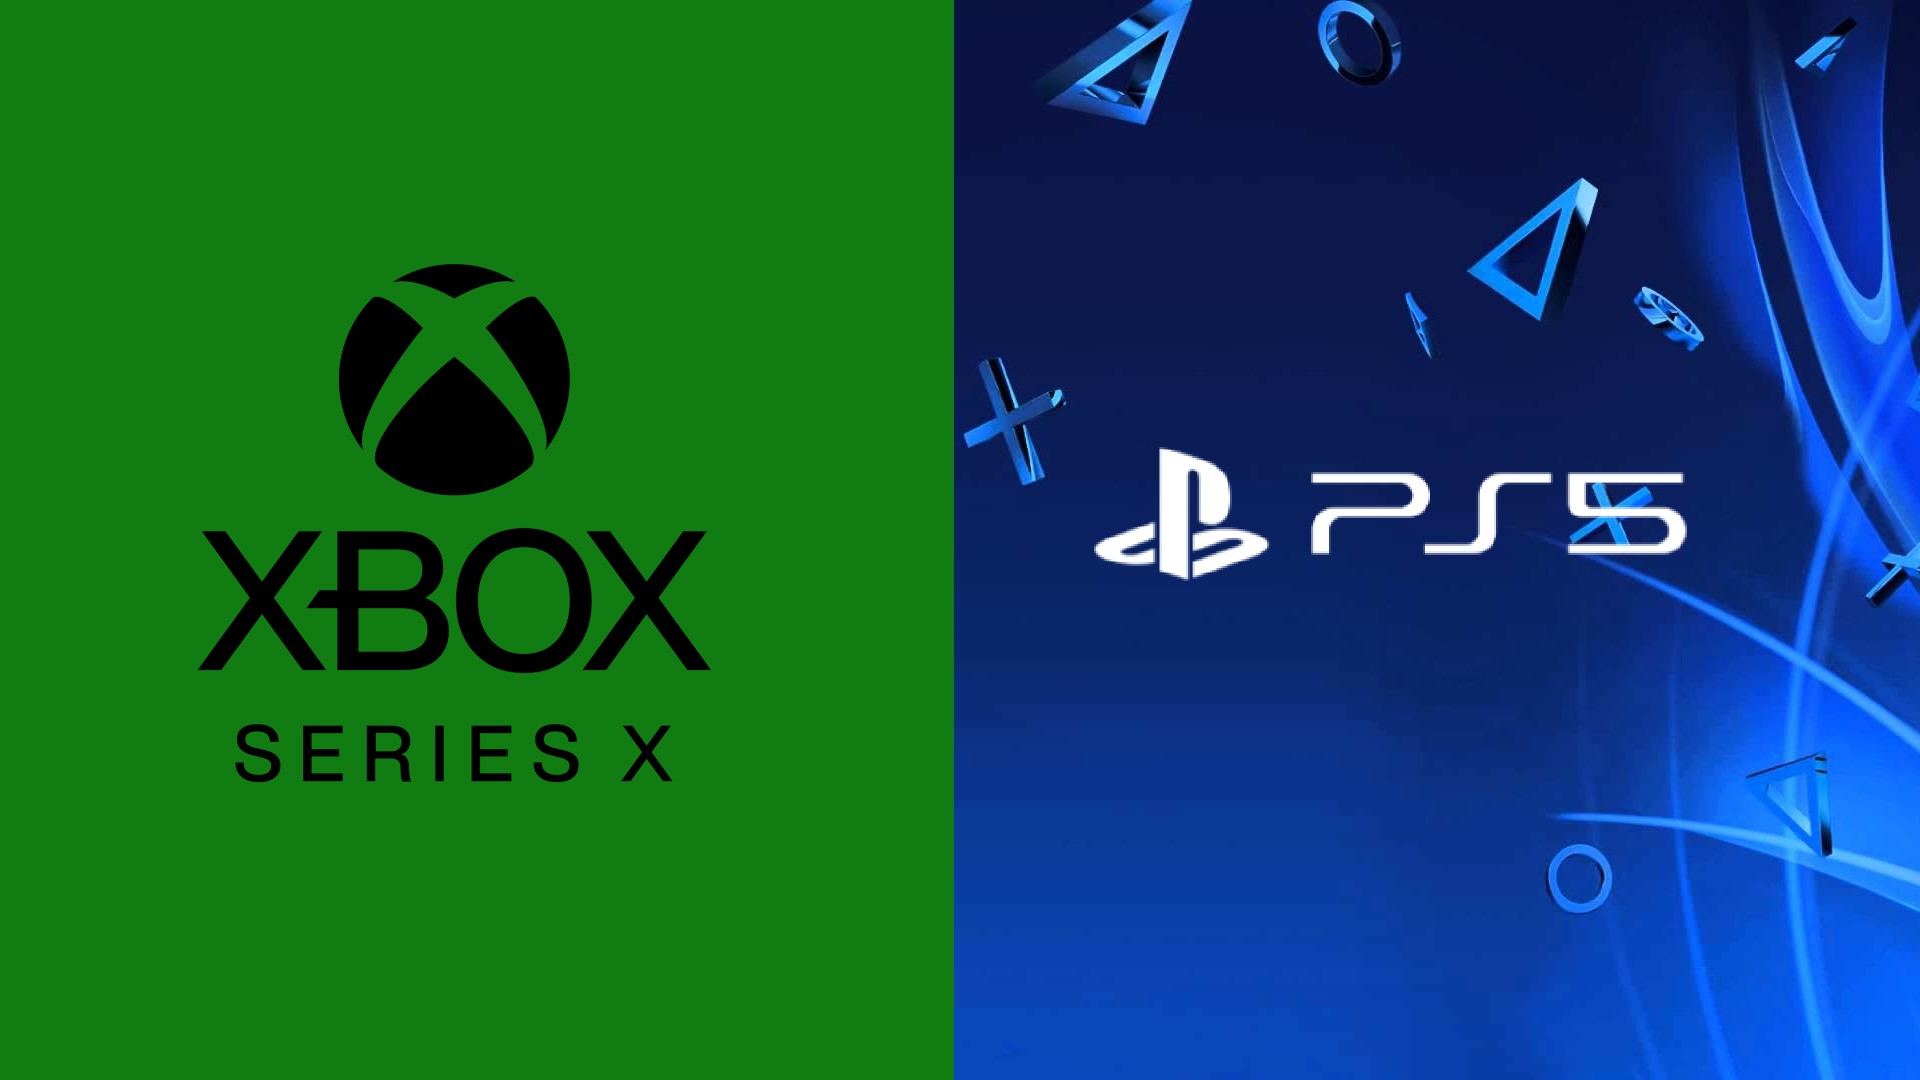 Sony And Microsoft Should Delay Next-Generation Consoles Until 2021